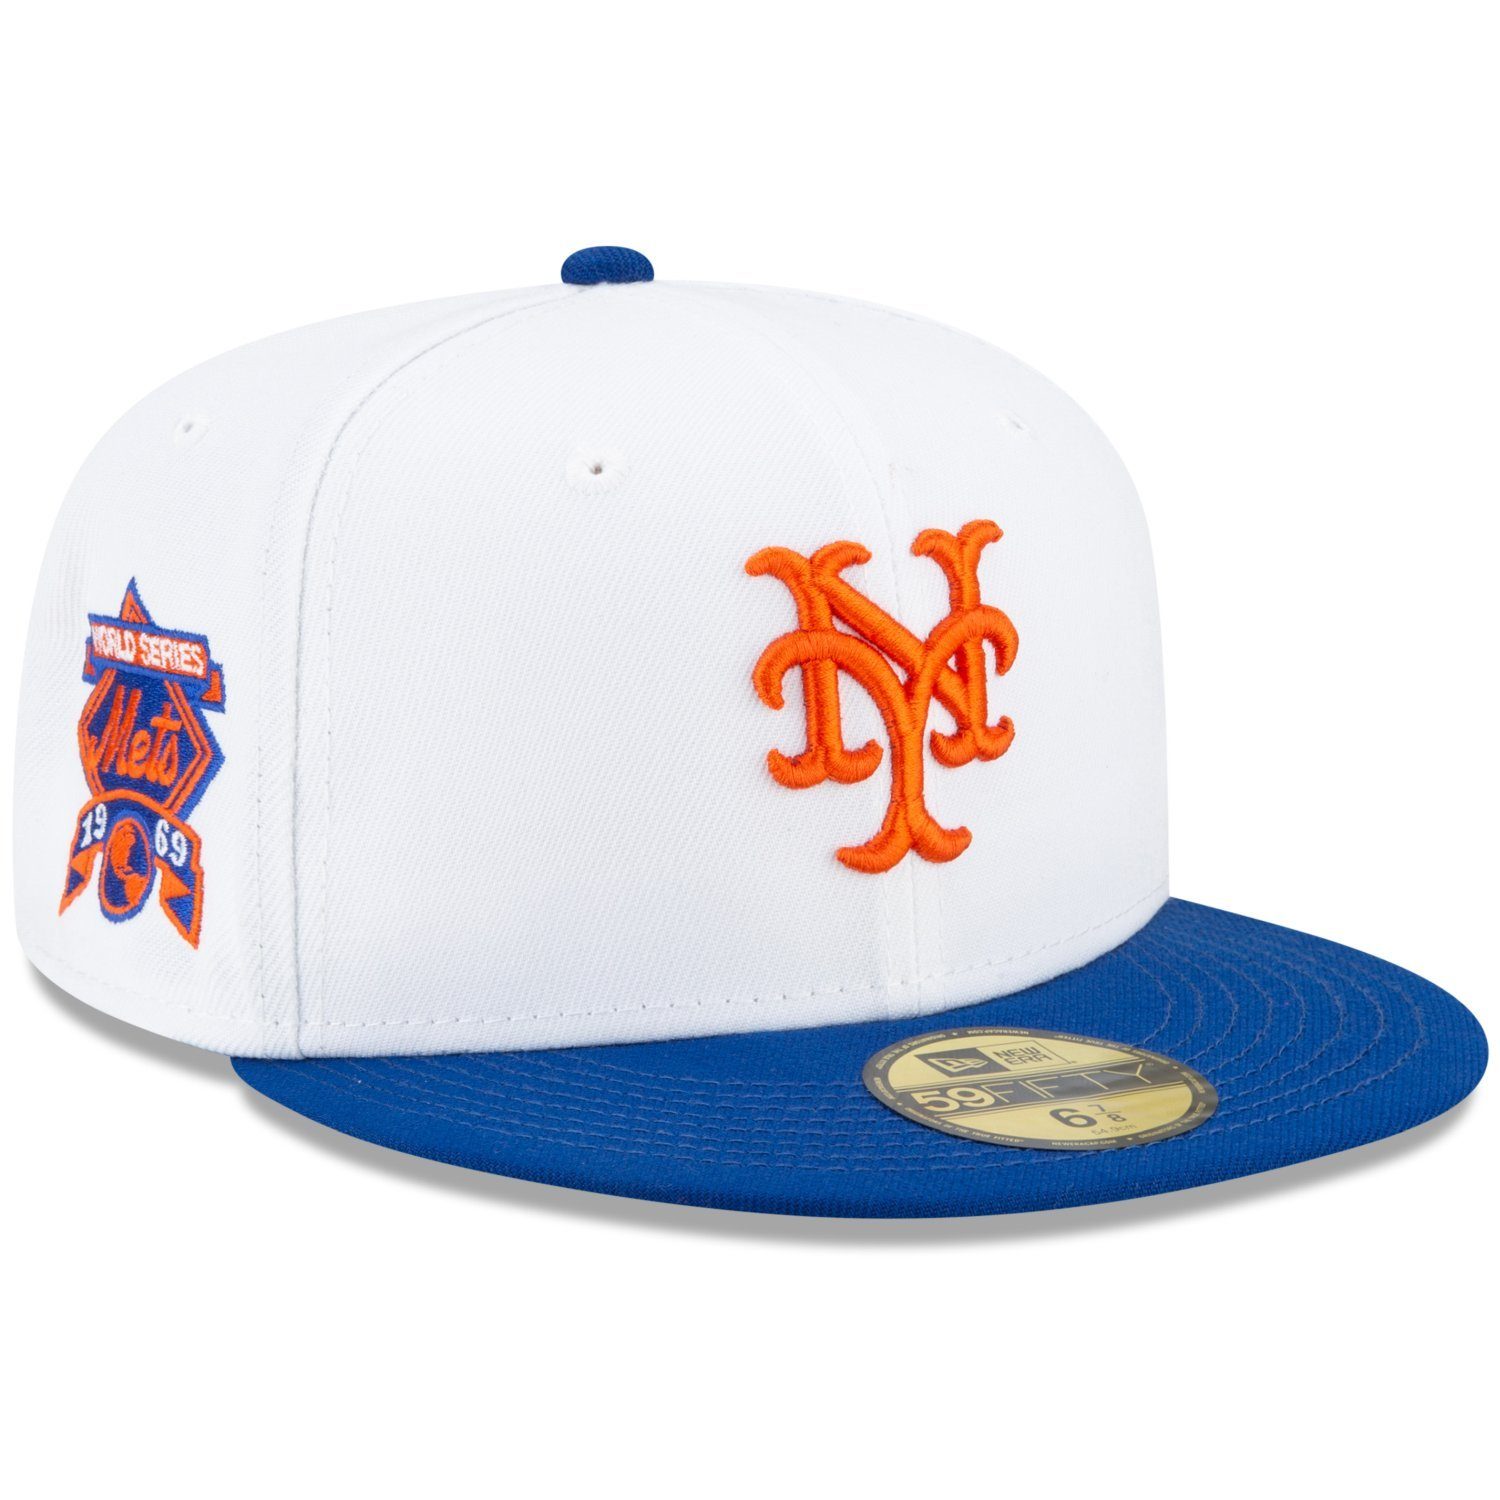 New Era Fitted Cap 59Fifty WORLD SERIES 1969 New York Mets